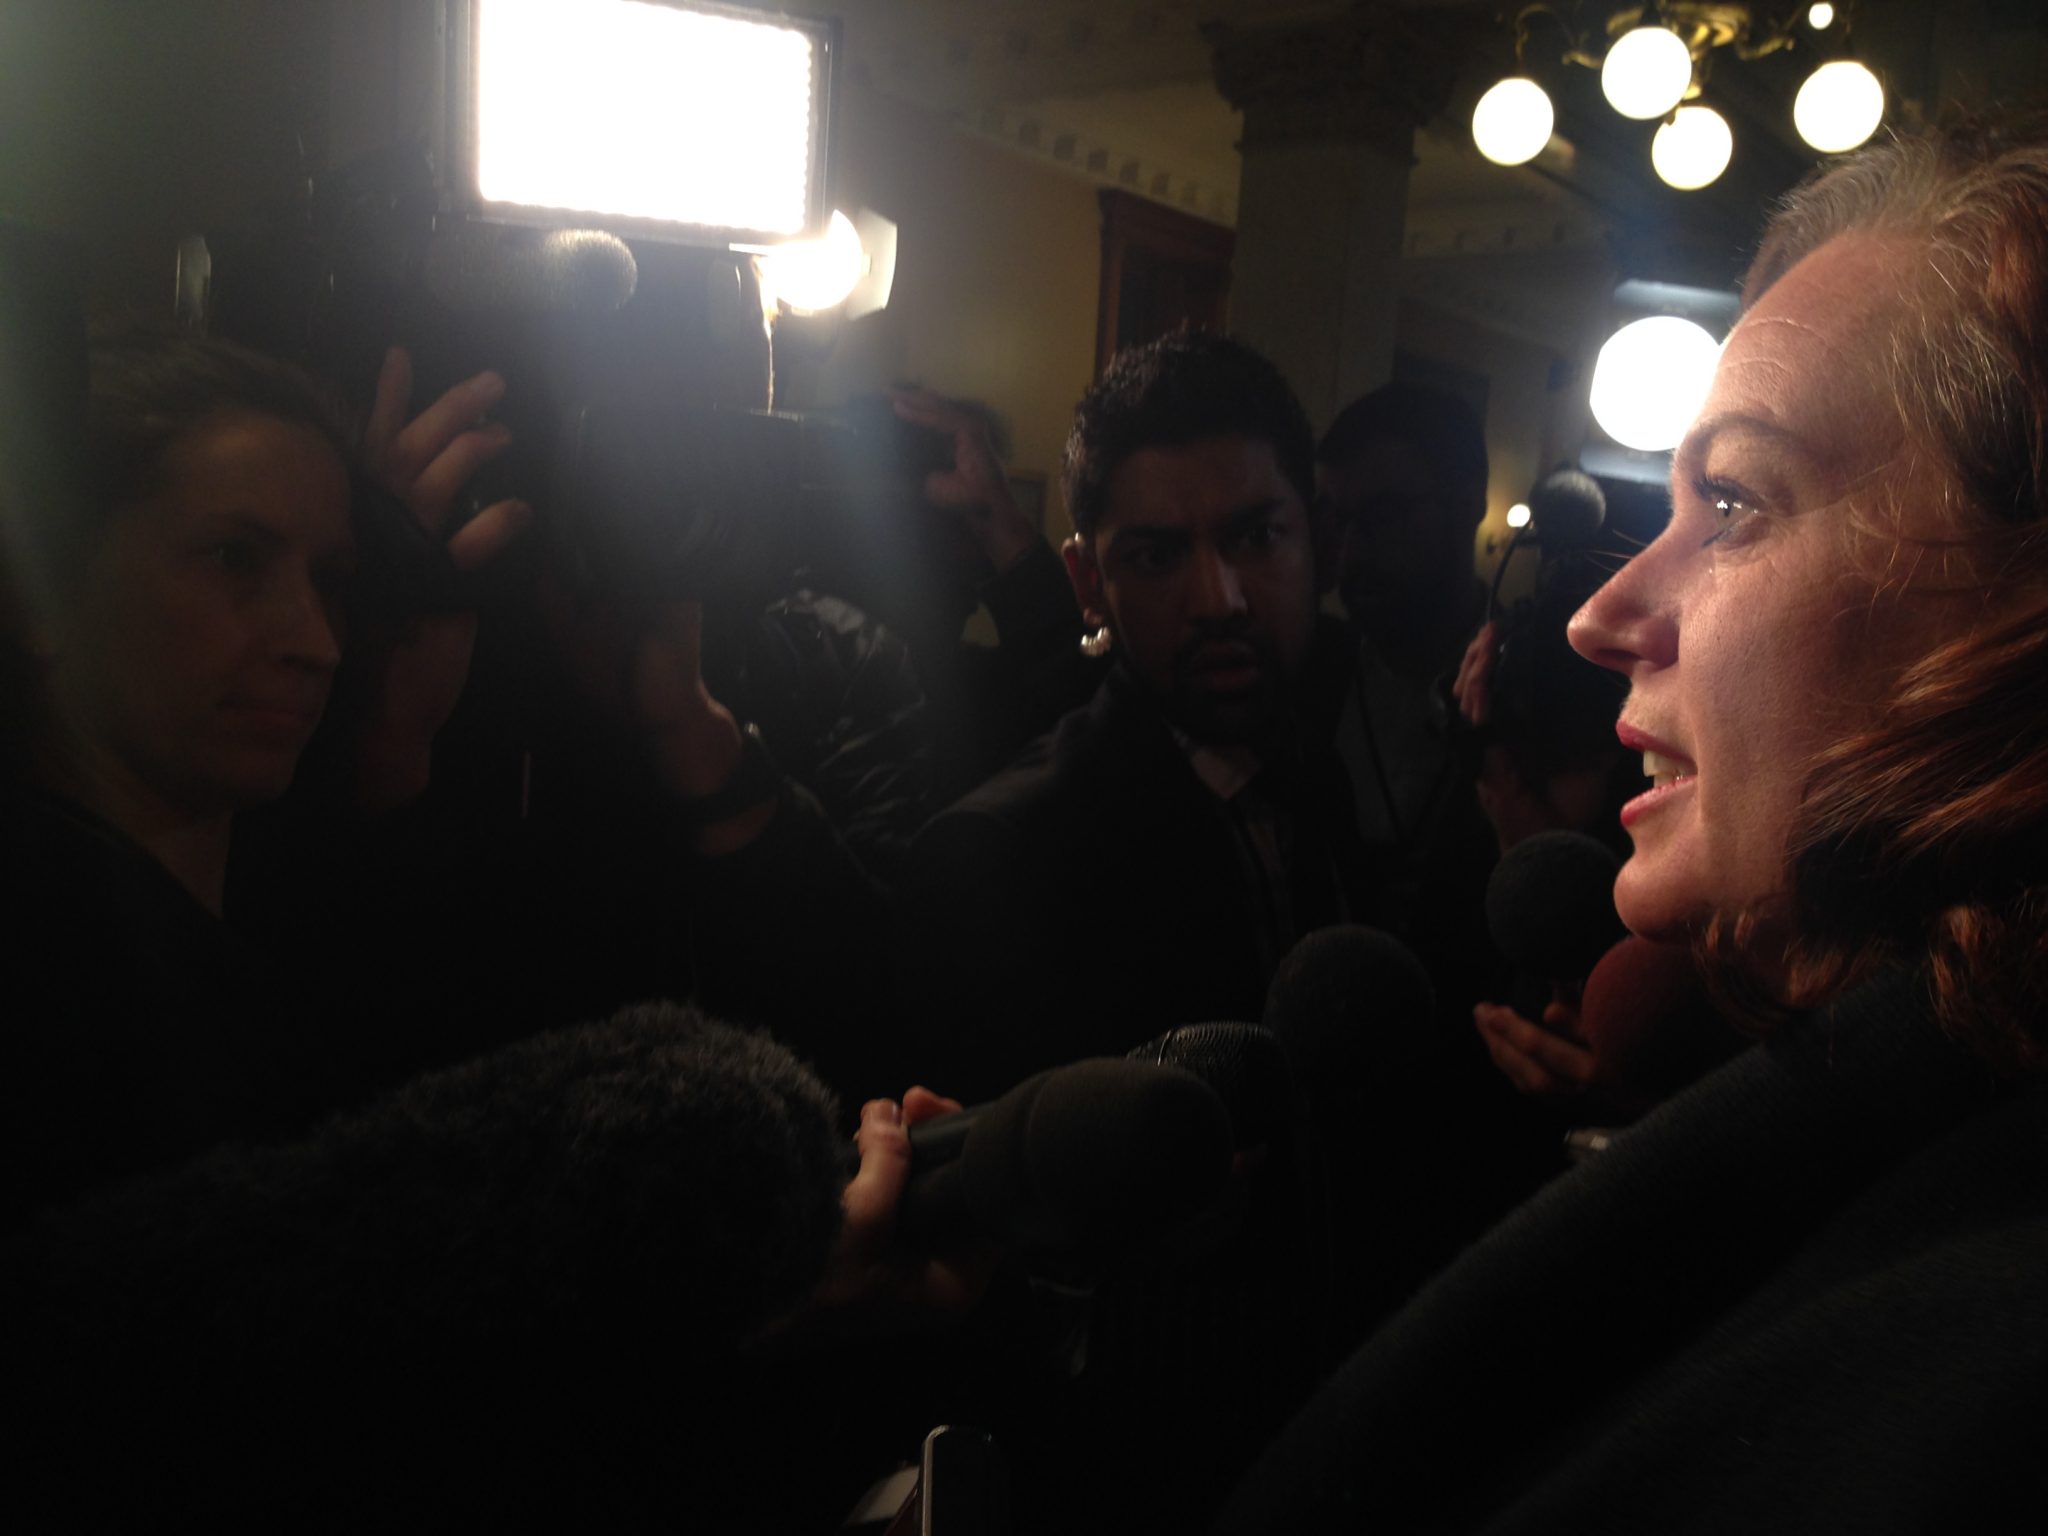 Lisa MacLeod: I reported allegations I'd heard about Patrick Brown to the campaign before Christmas